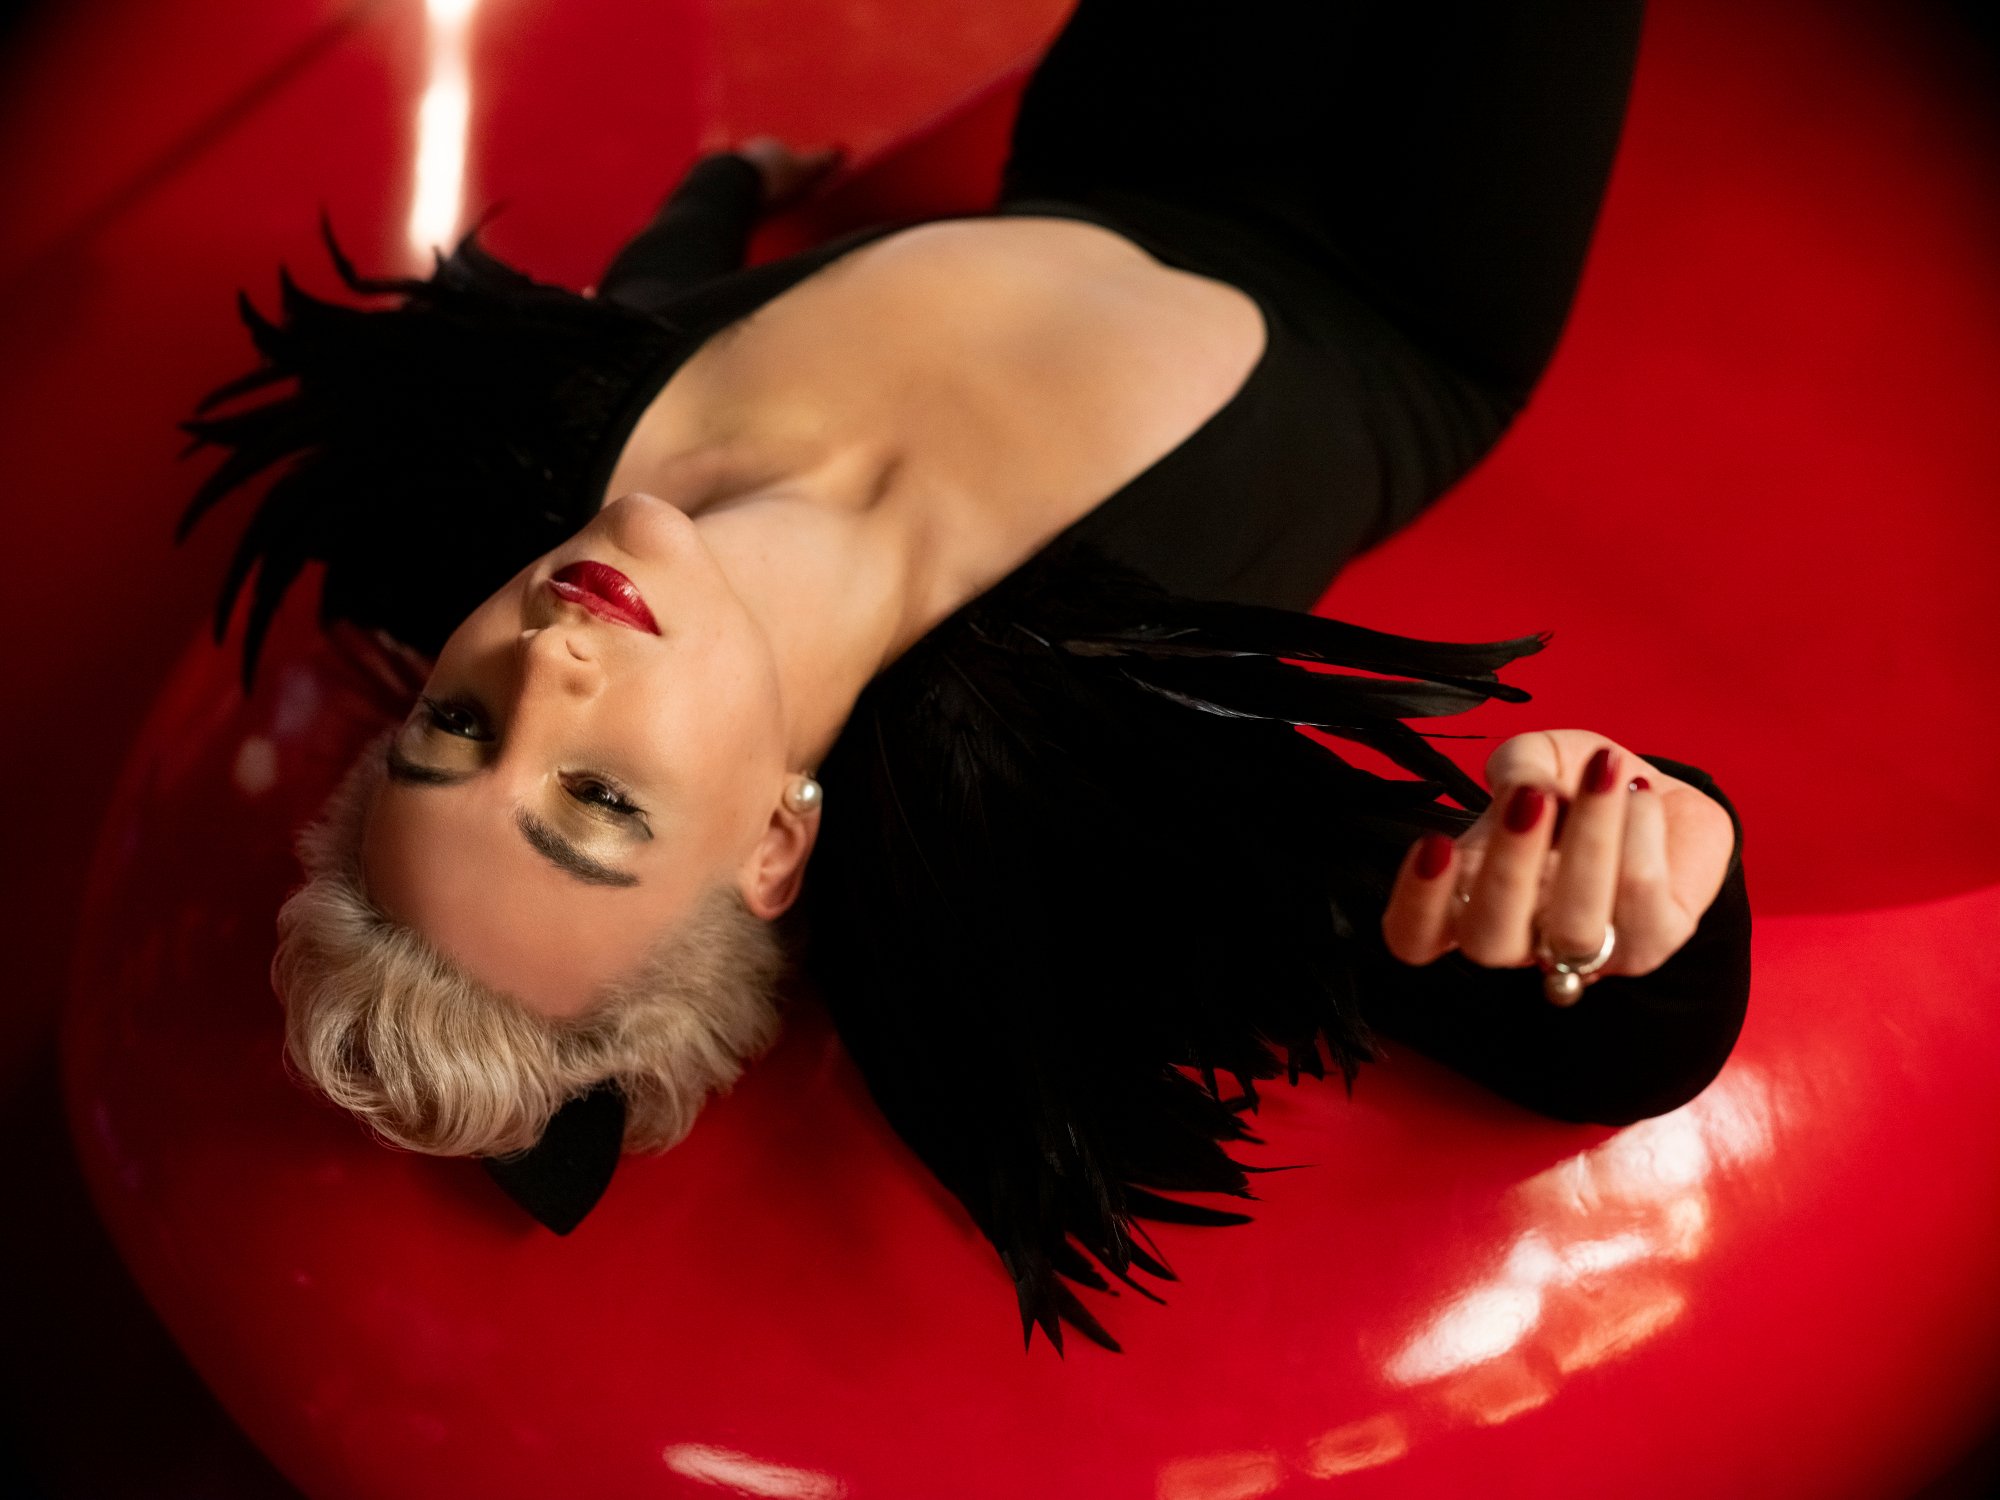 Mason Alexander Park as Desire in 'The Sandman' Season 1's ending episode. Desire is lying on a red seat and wearing red lipstick and a black outfit.